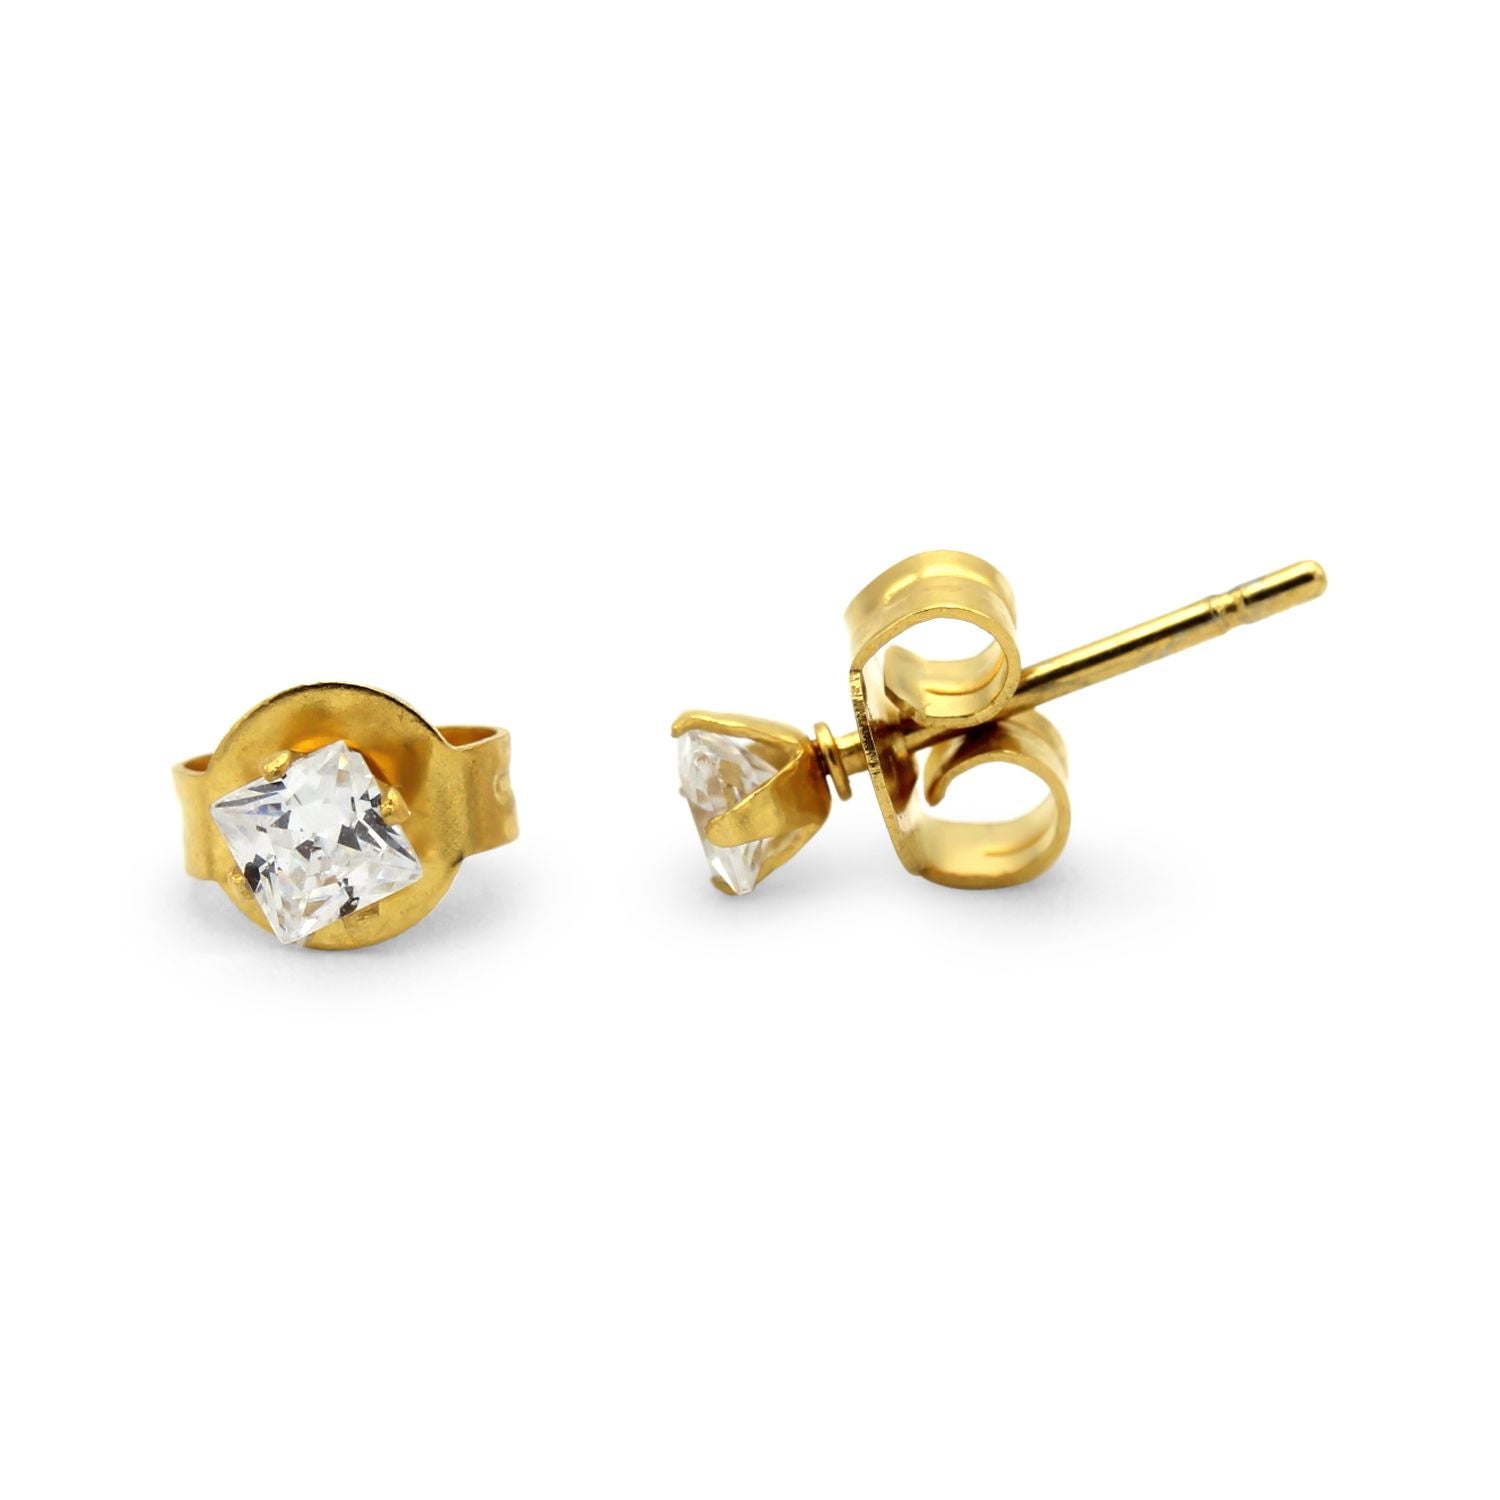 Squared Cubic Zirconia Ear Studs For Men - PAIR – Code Earrings For Man